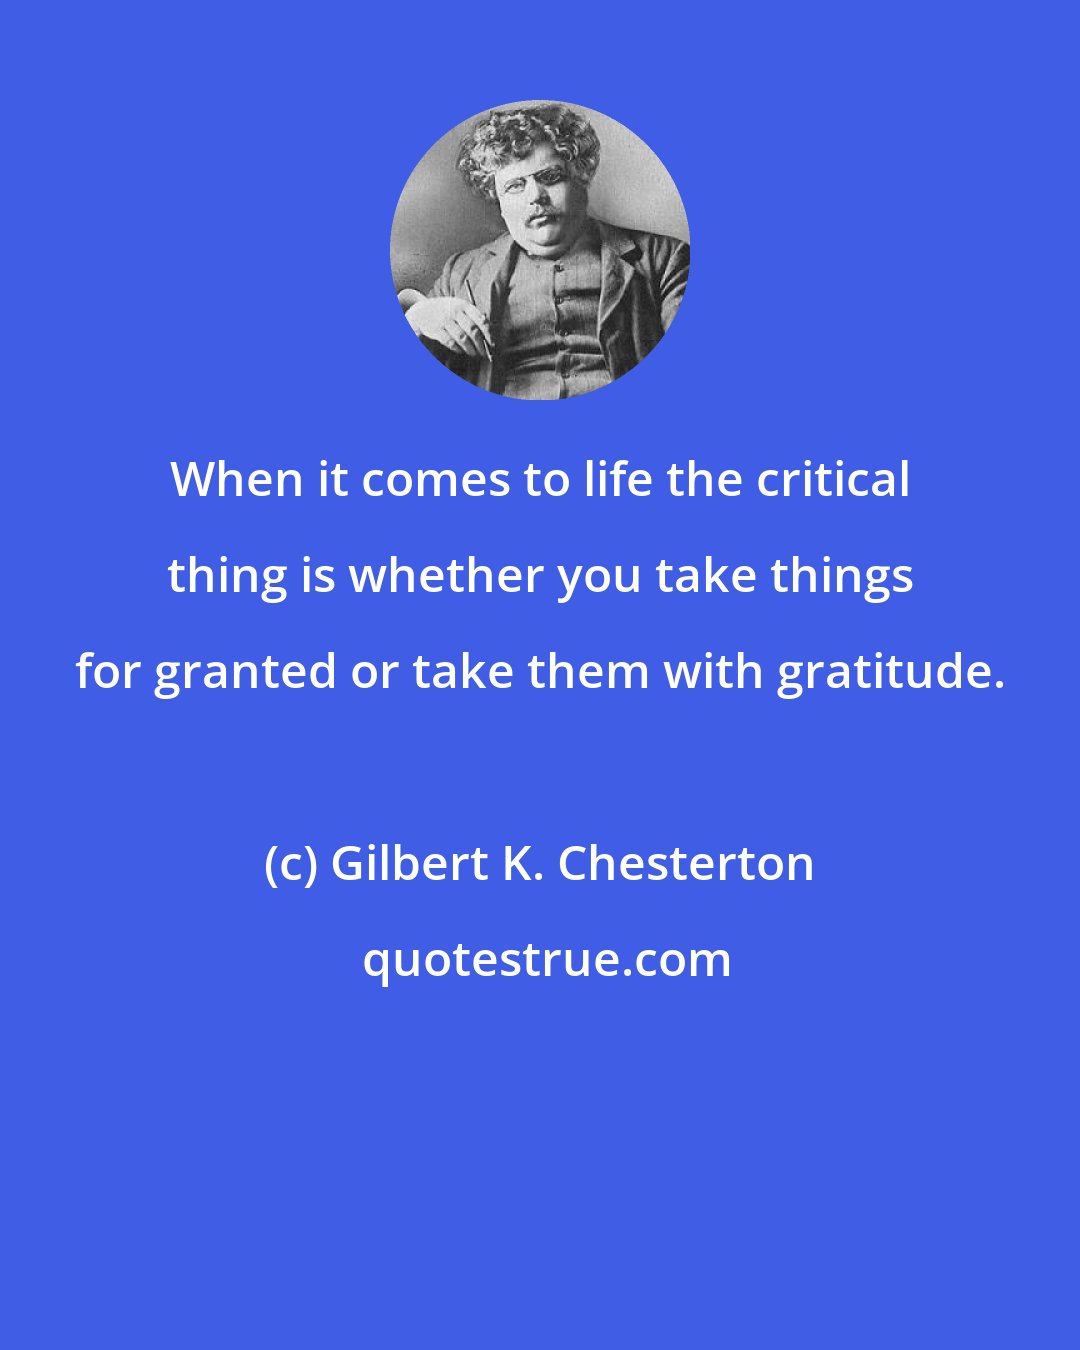 Gilbert K. Chesterton: When it comes to life the critical thing is whether you take things for granted or take them with gratitude.